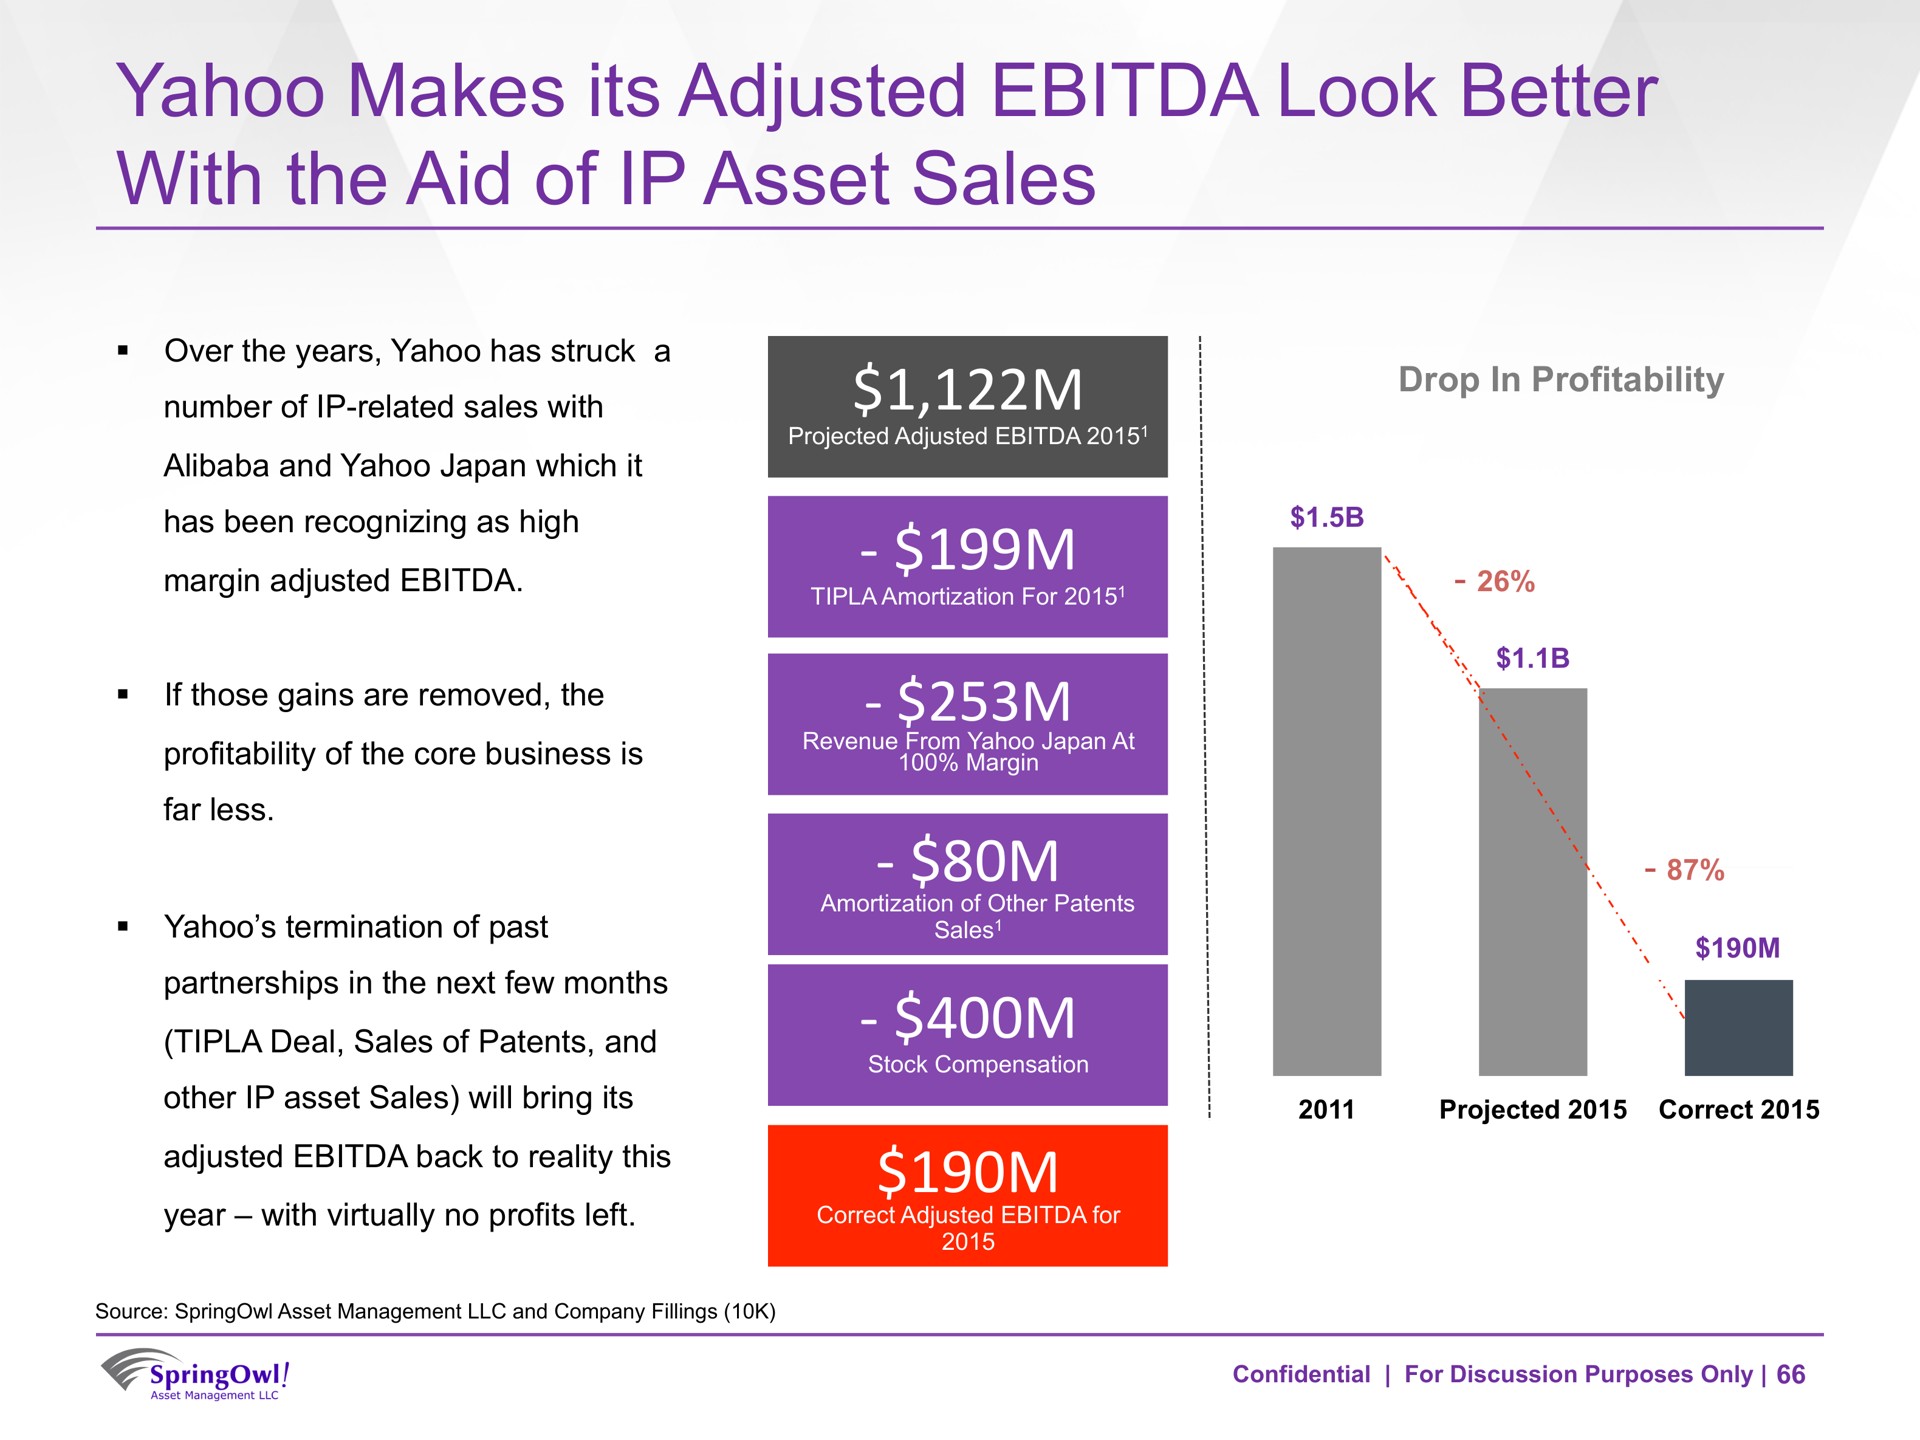 yahoo makes its adjusted look better with the aid of asset sales | SpringOwl